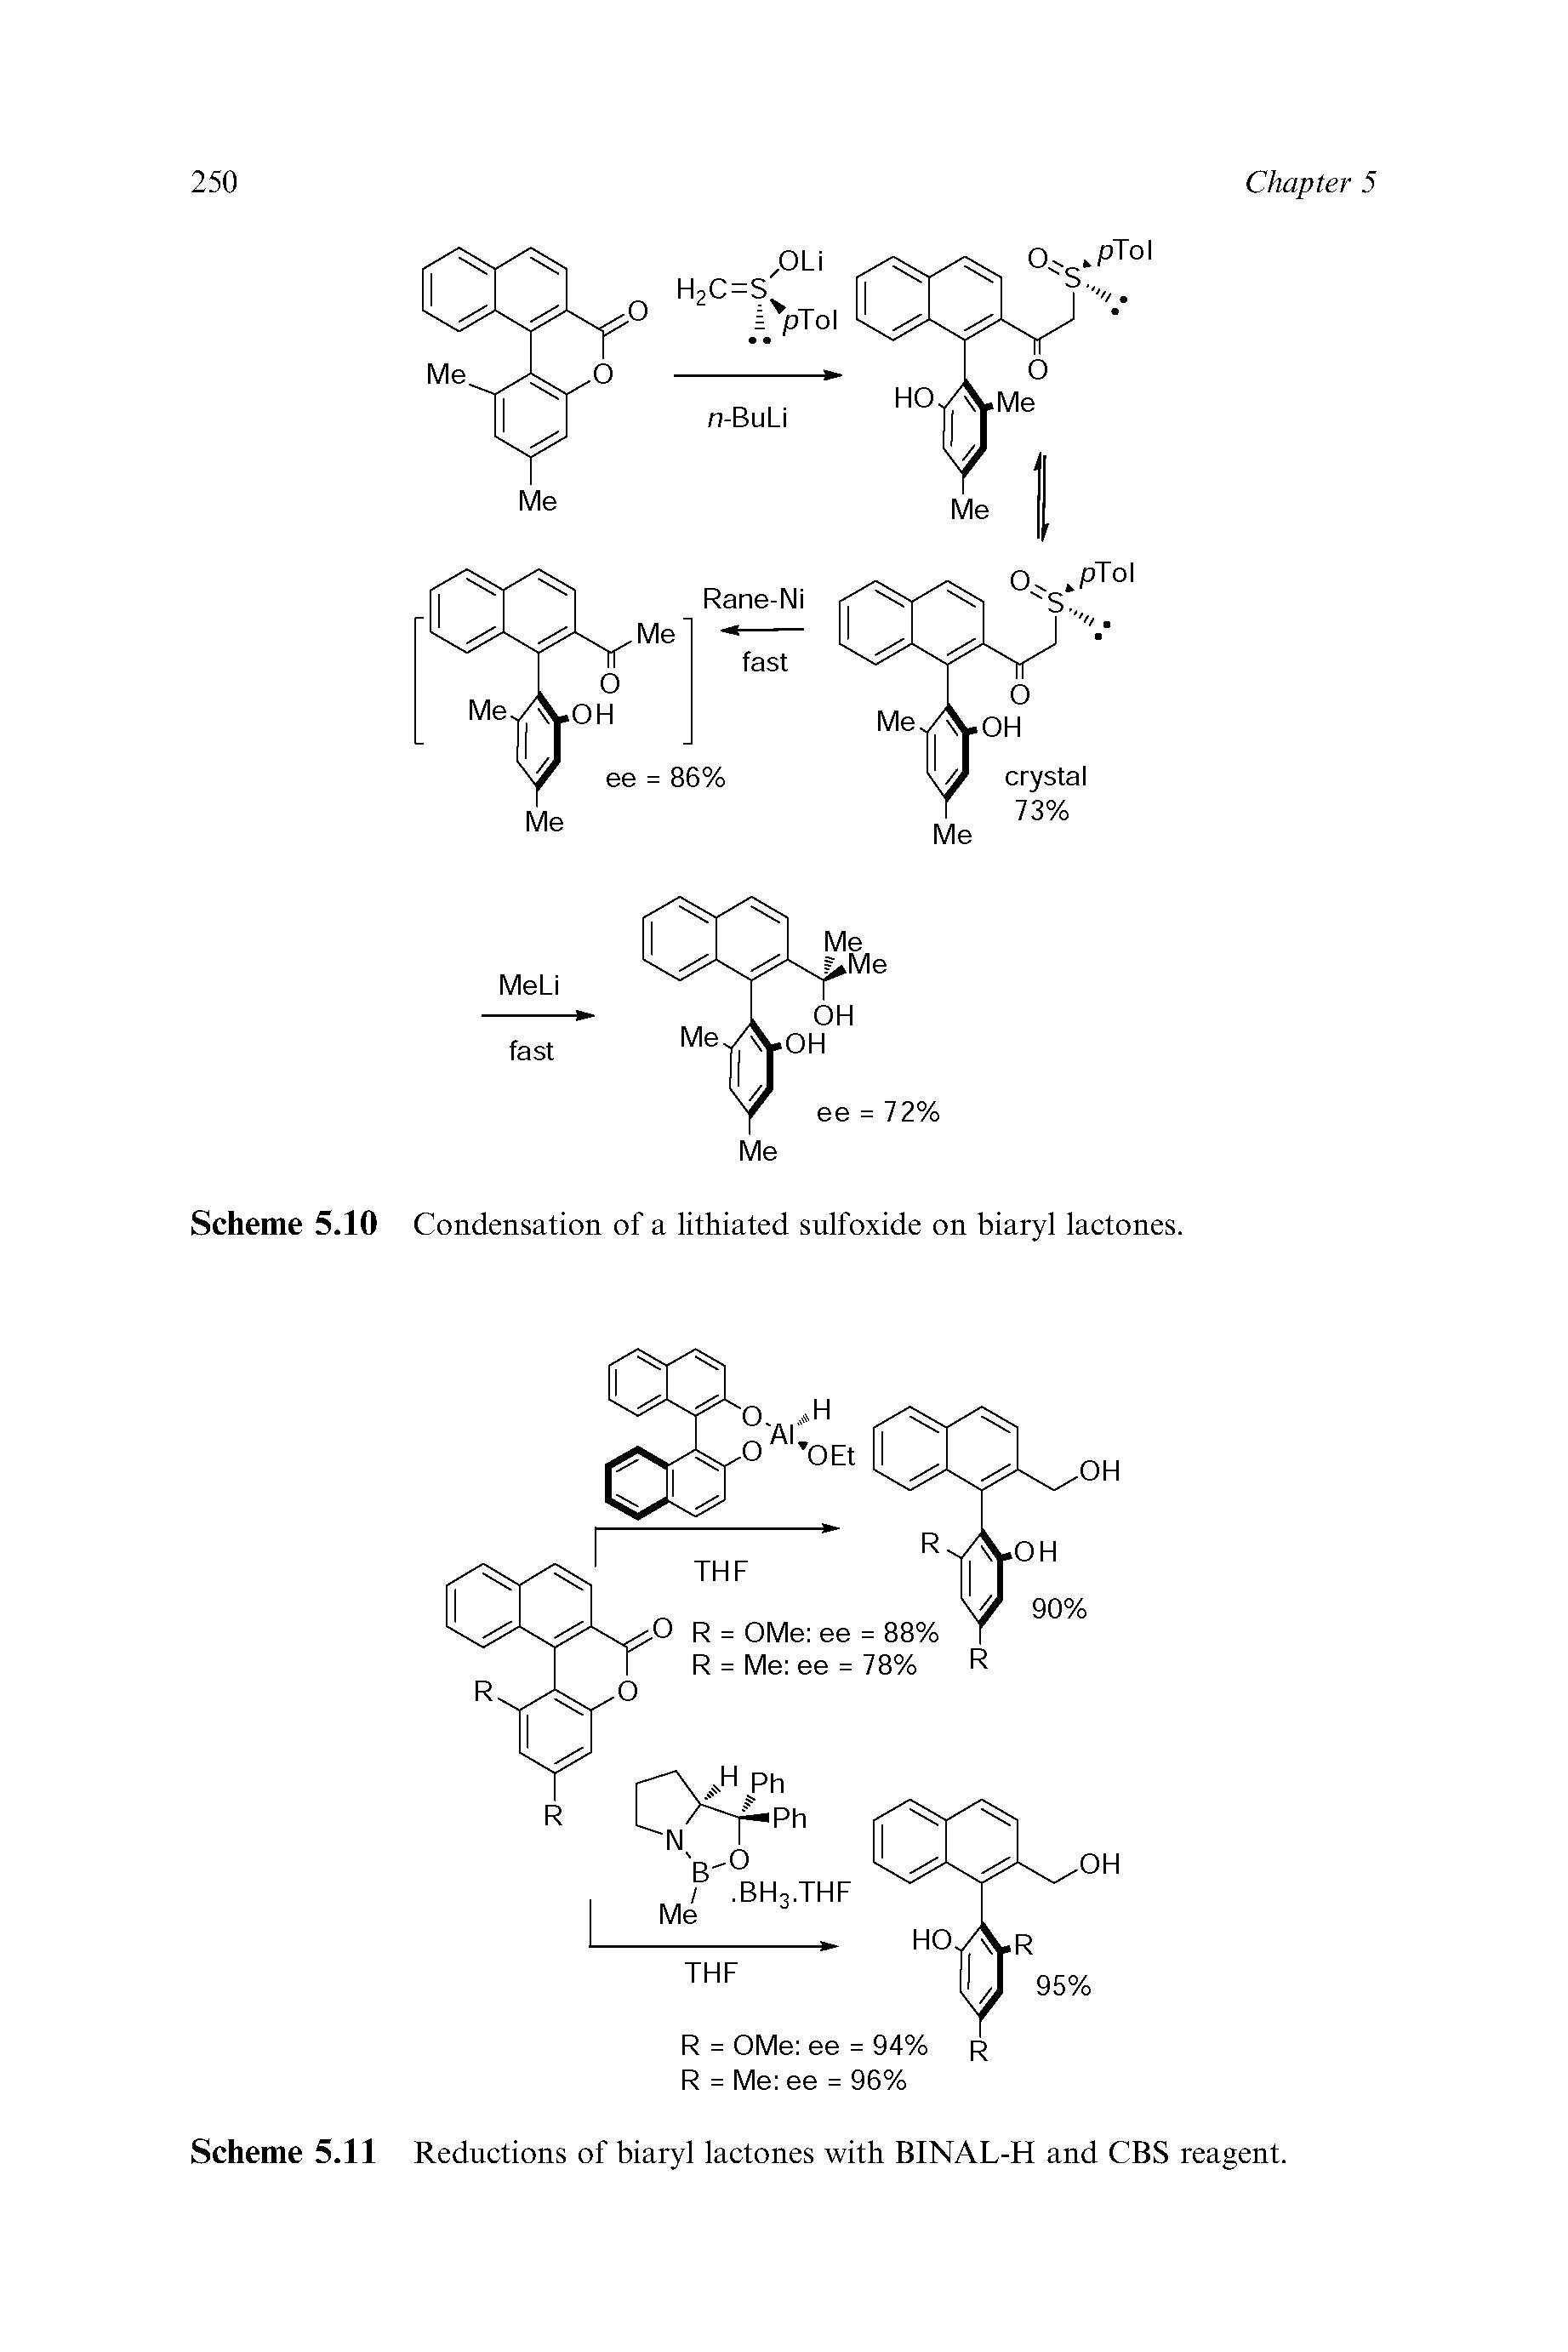 Scheme 5.11 Reductions of biaryl lactones with BINAL-H and CBS reagent.